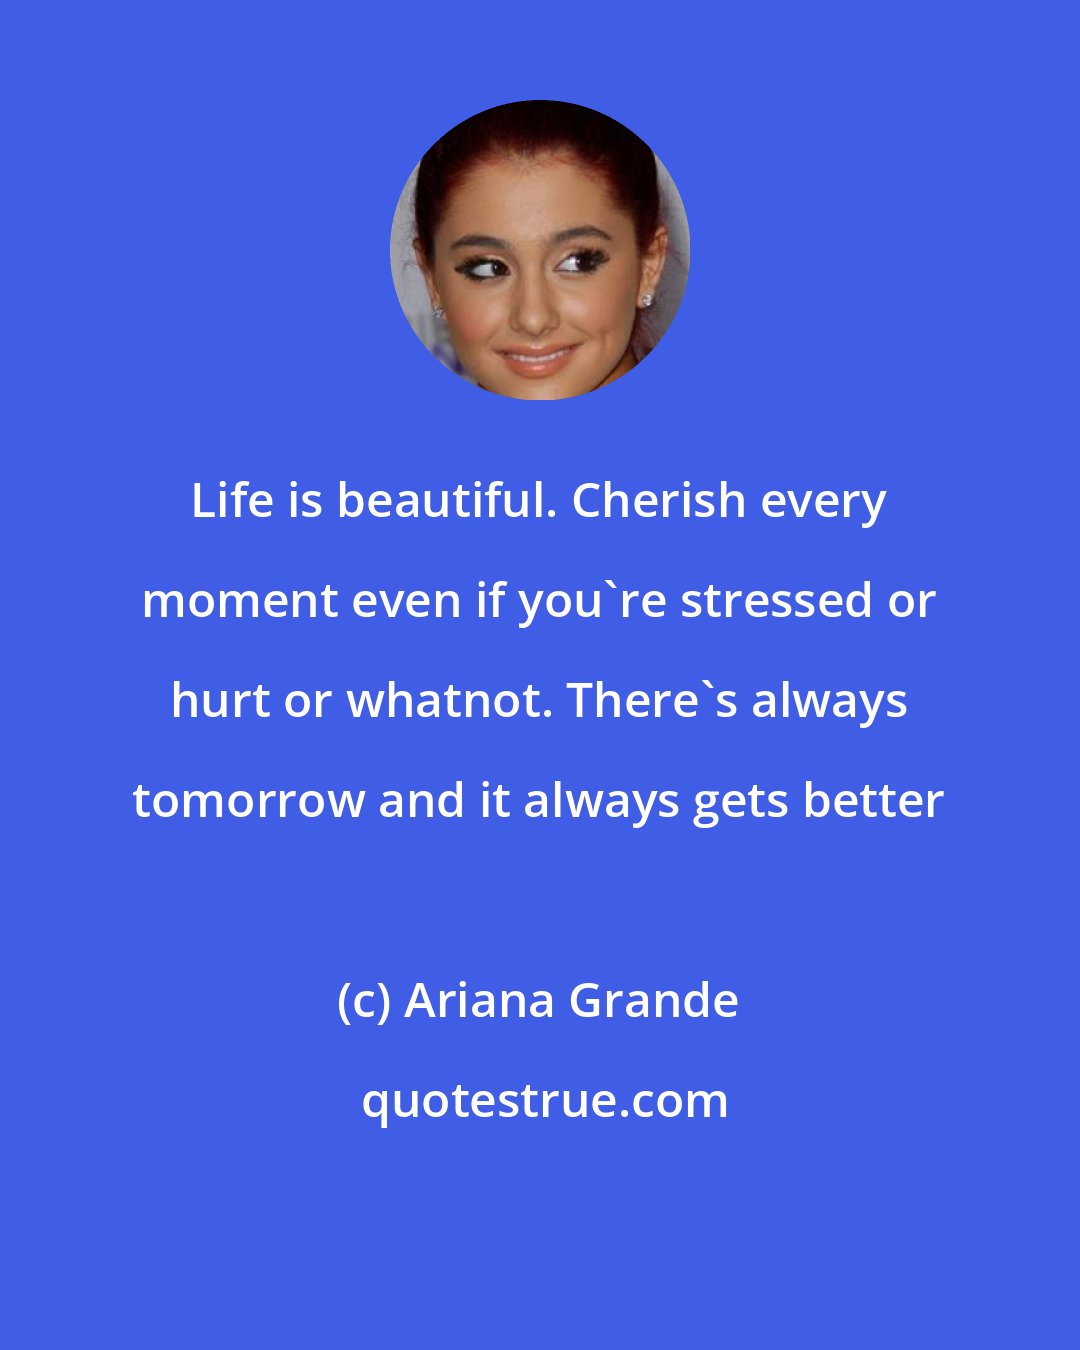 Ariana Grande: Life is beautiful. Cherish every moment even if you're stressed or hurt or whatnot. There's always tomorrow and it always gets better